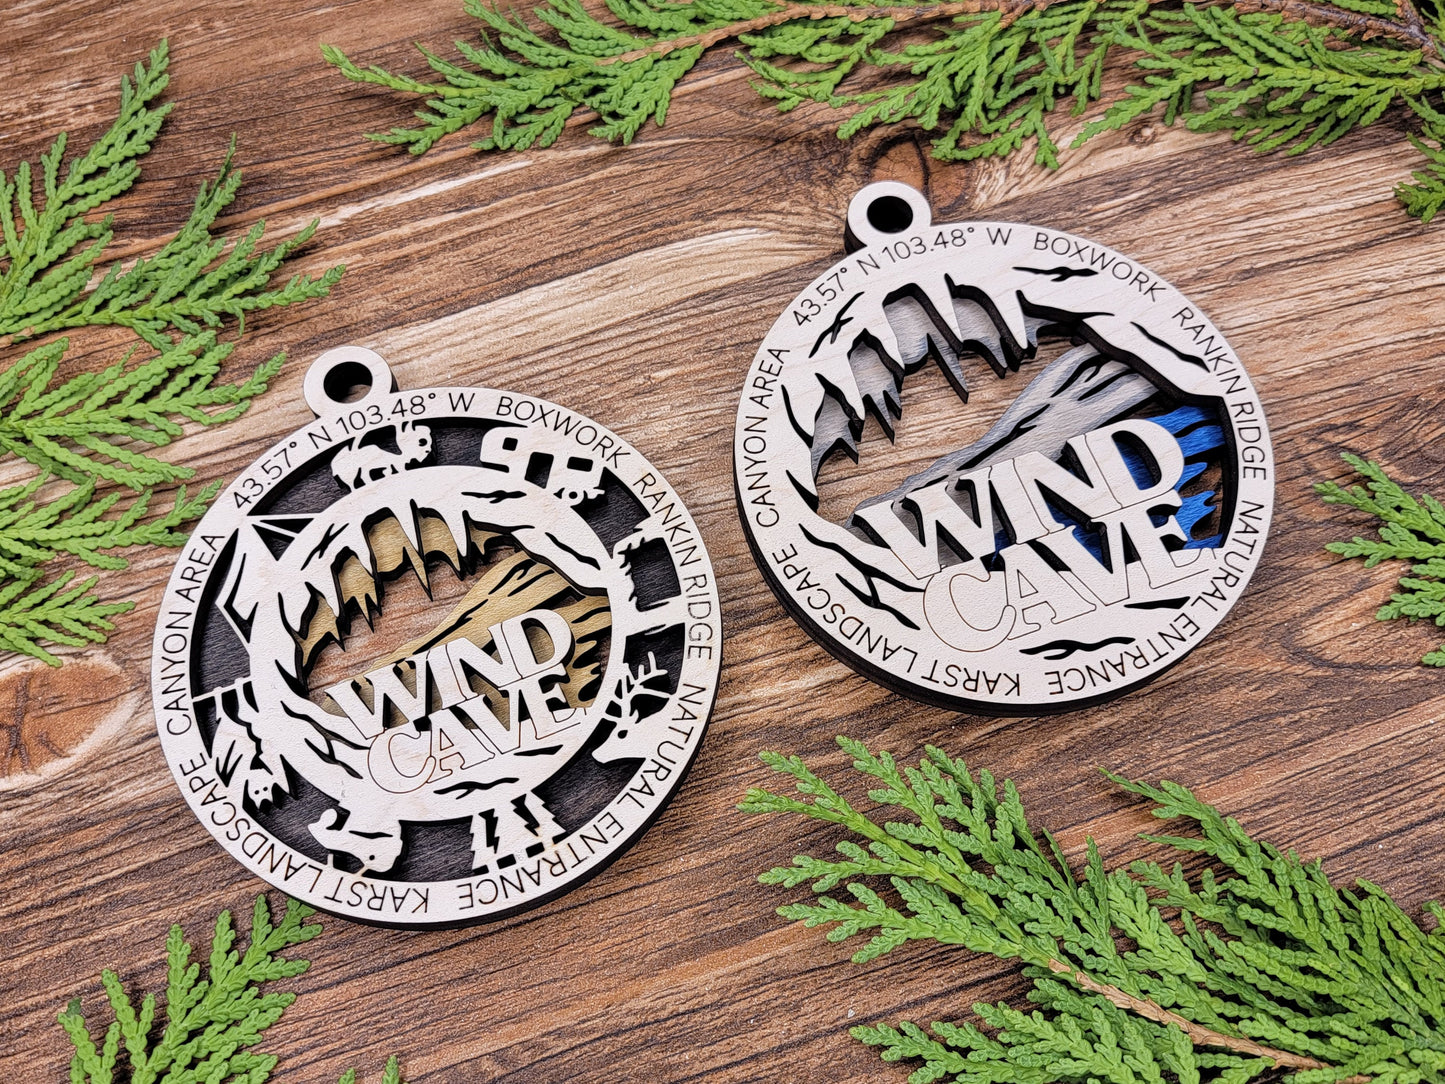 Wind Cave Park Ornament - Includes 2 Ornaments - Laser Design SVG, PDF, AI File Download - Tested On Glowforge and LightBurn